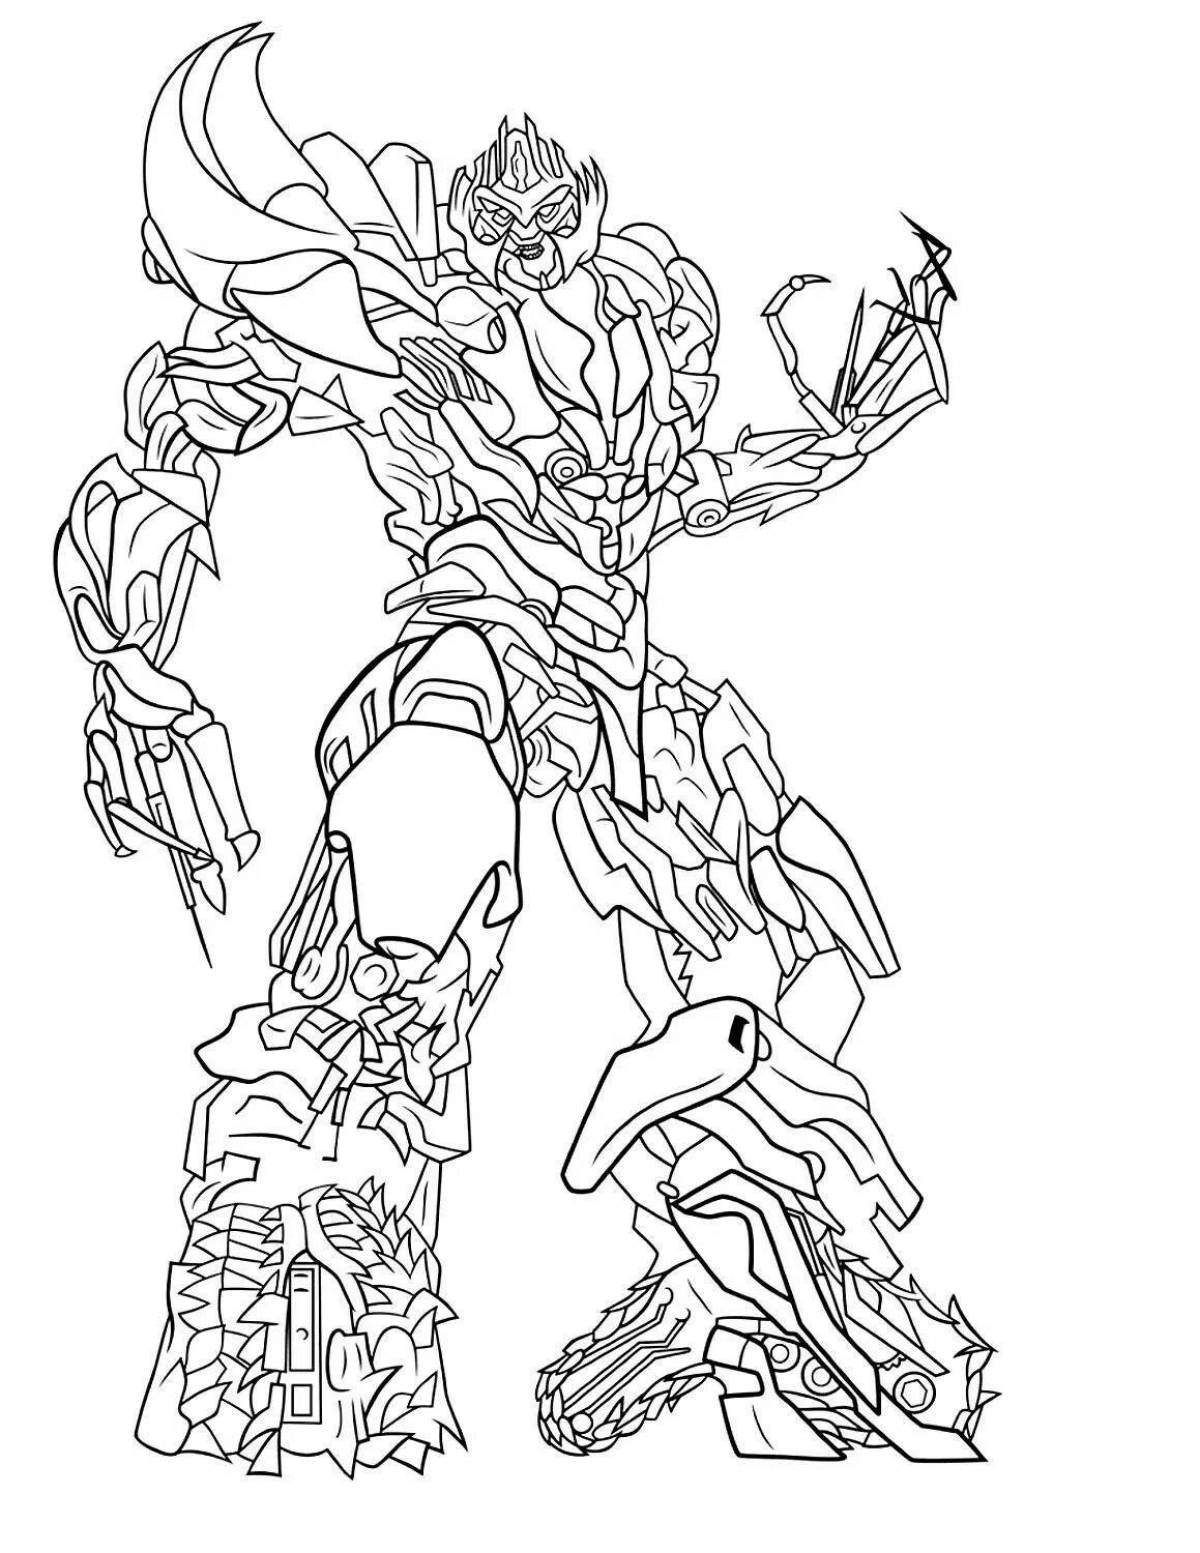 Charming transformers movie coloring book